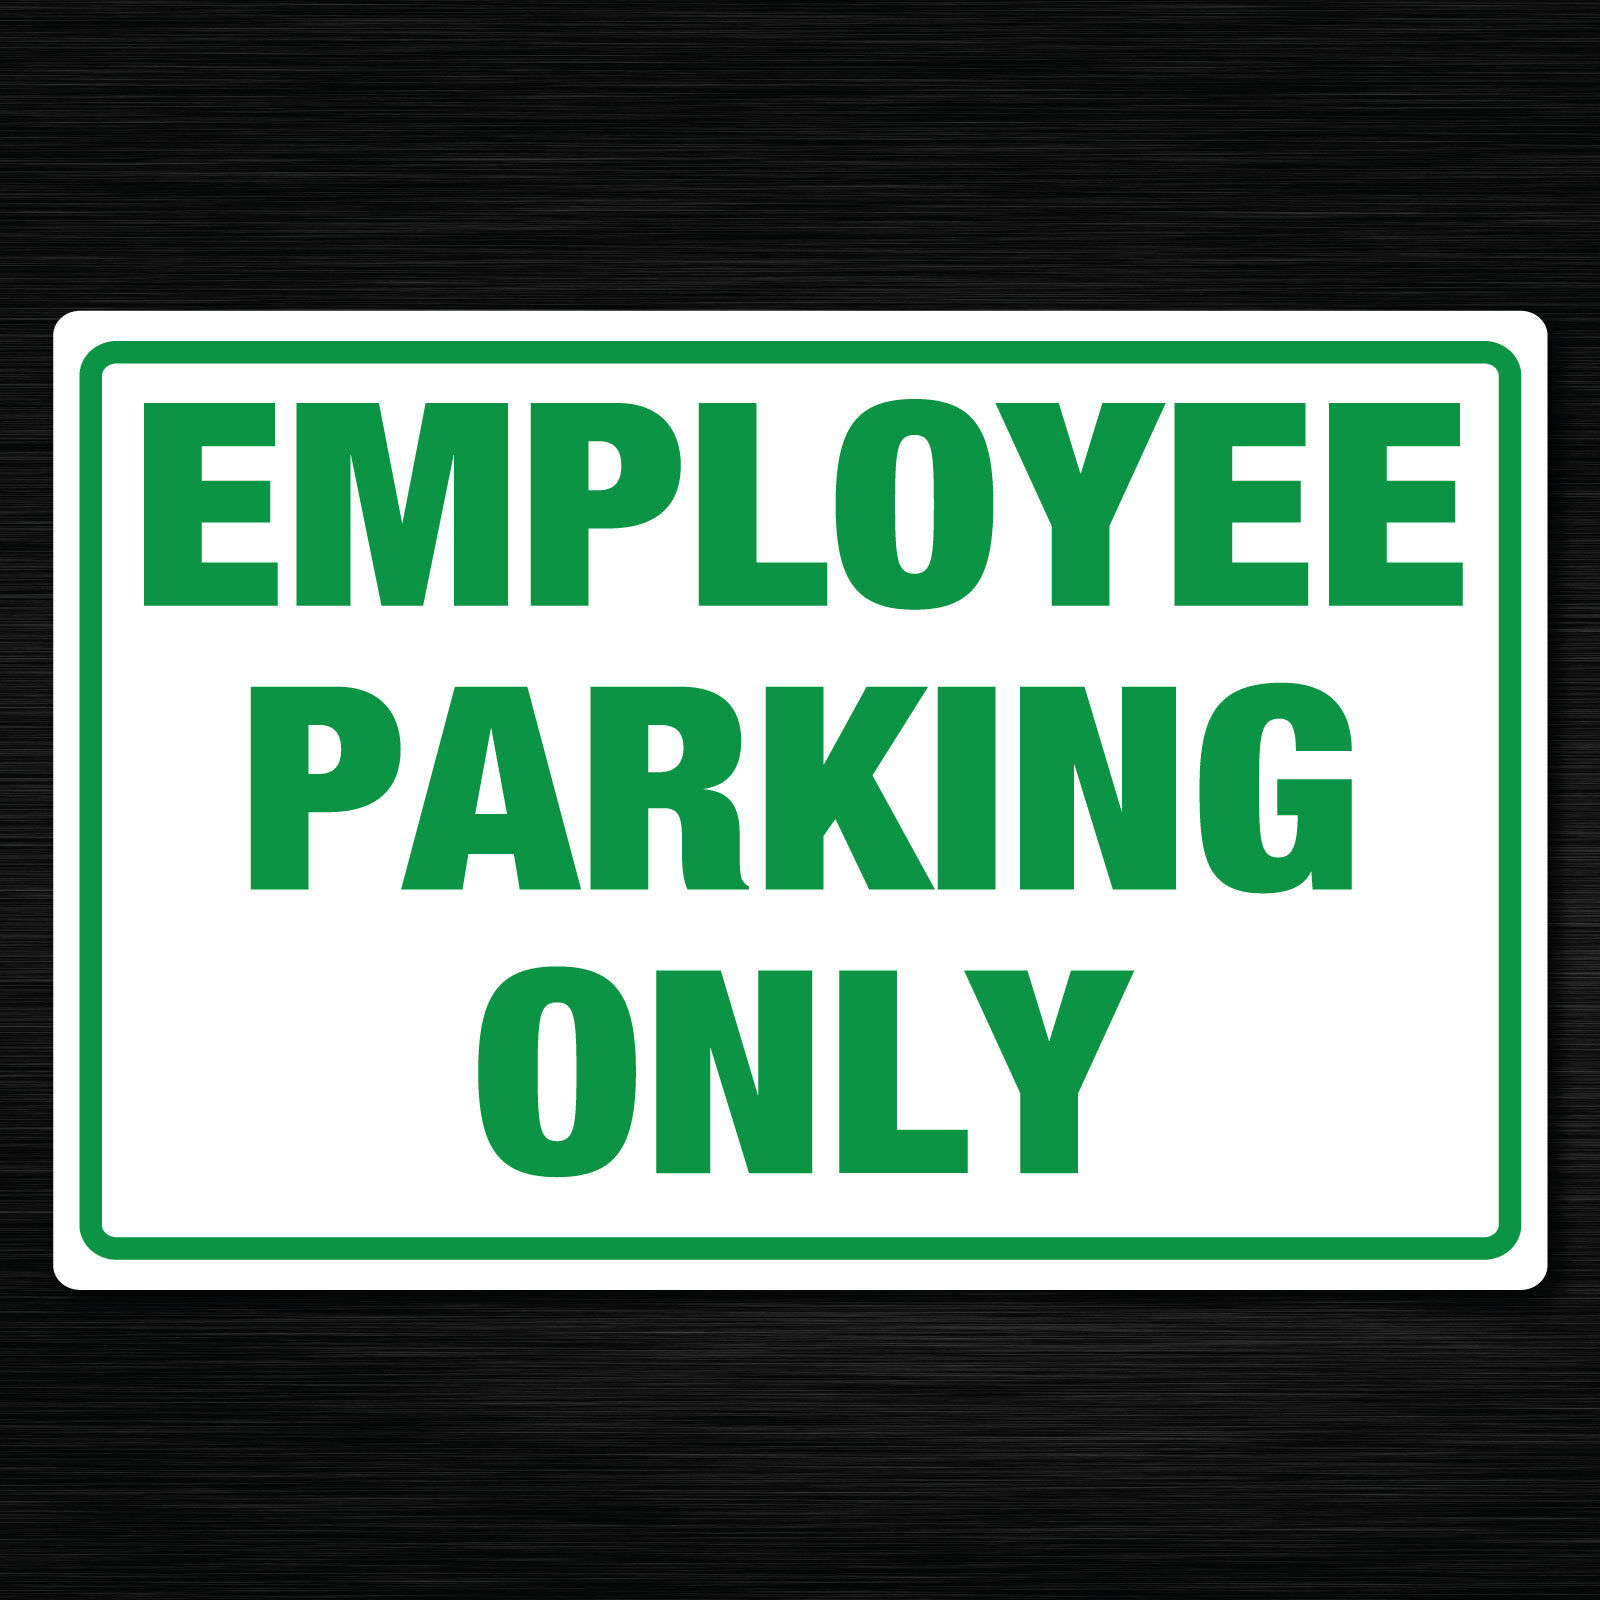 Employee Parking service Only Sign 7 year fade water proof vinyl Recommended